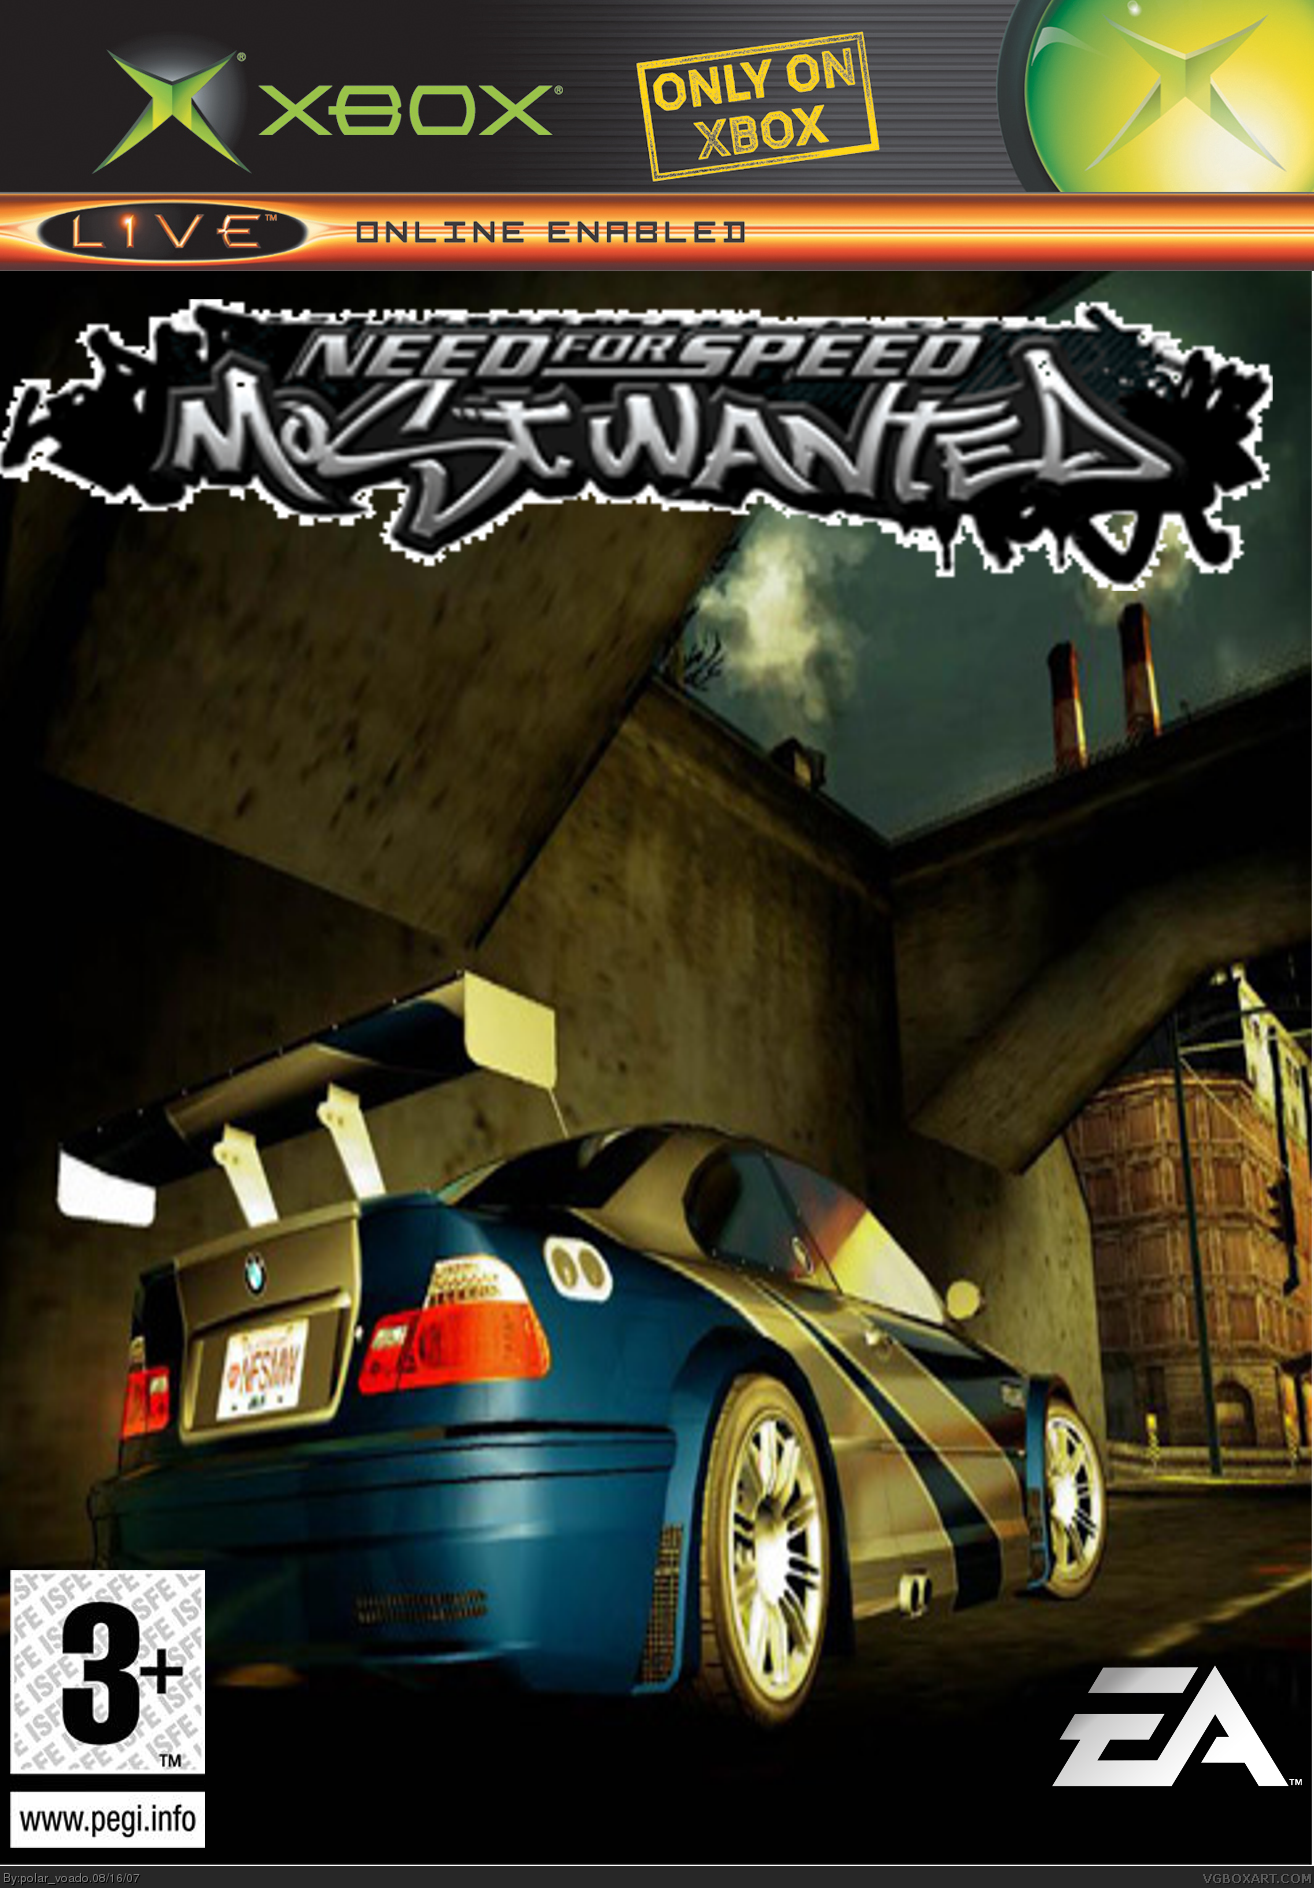 malaysia bay org 6081 torrent 7771853 need speed most wanted skidrow